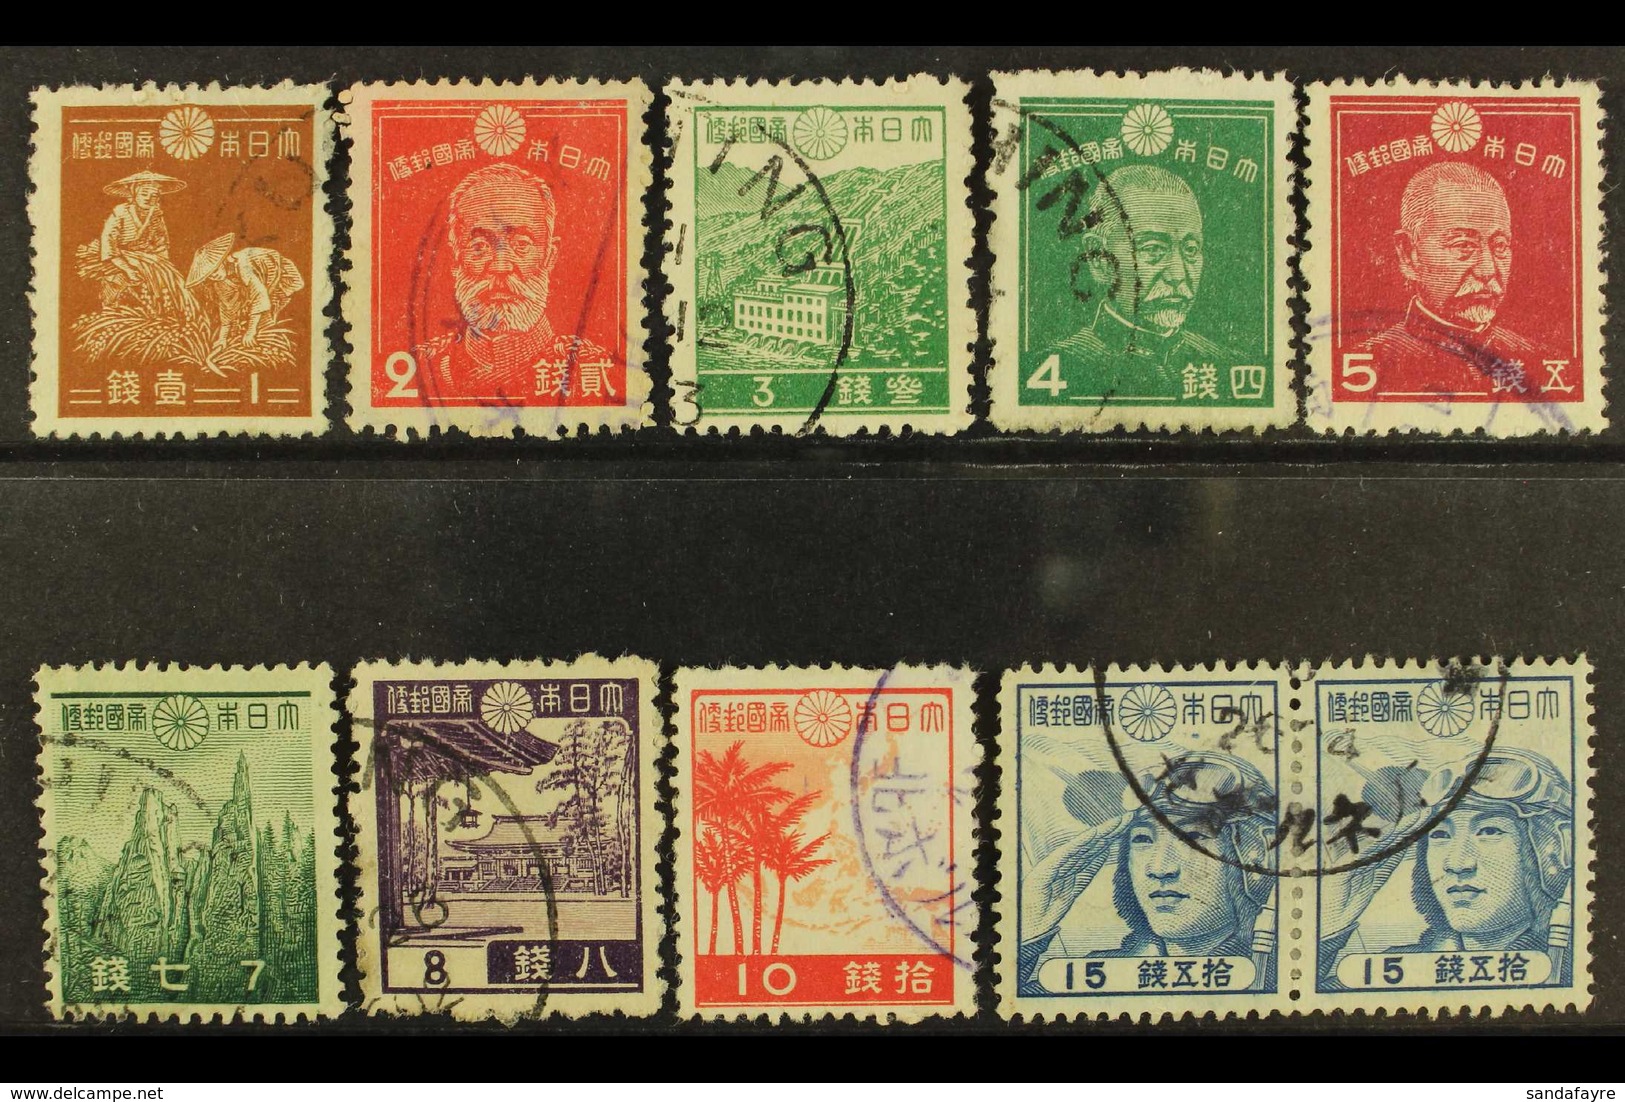 JAPANESE OCCUPATION 1942 Selection Of Japanese Stamps Used In Kuching Incl Superb Pair Of The 15s Blue Aviator. (10 Stam - Sarawak (...-1963)